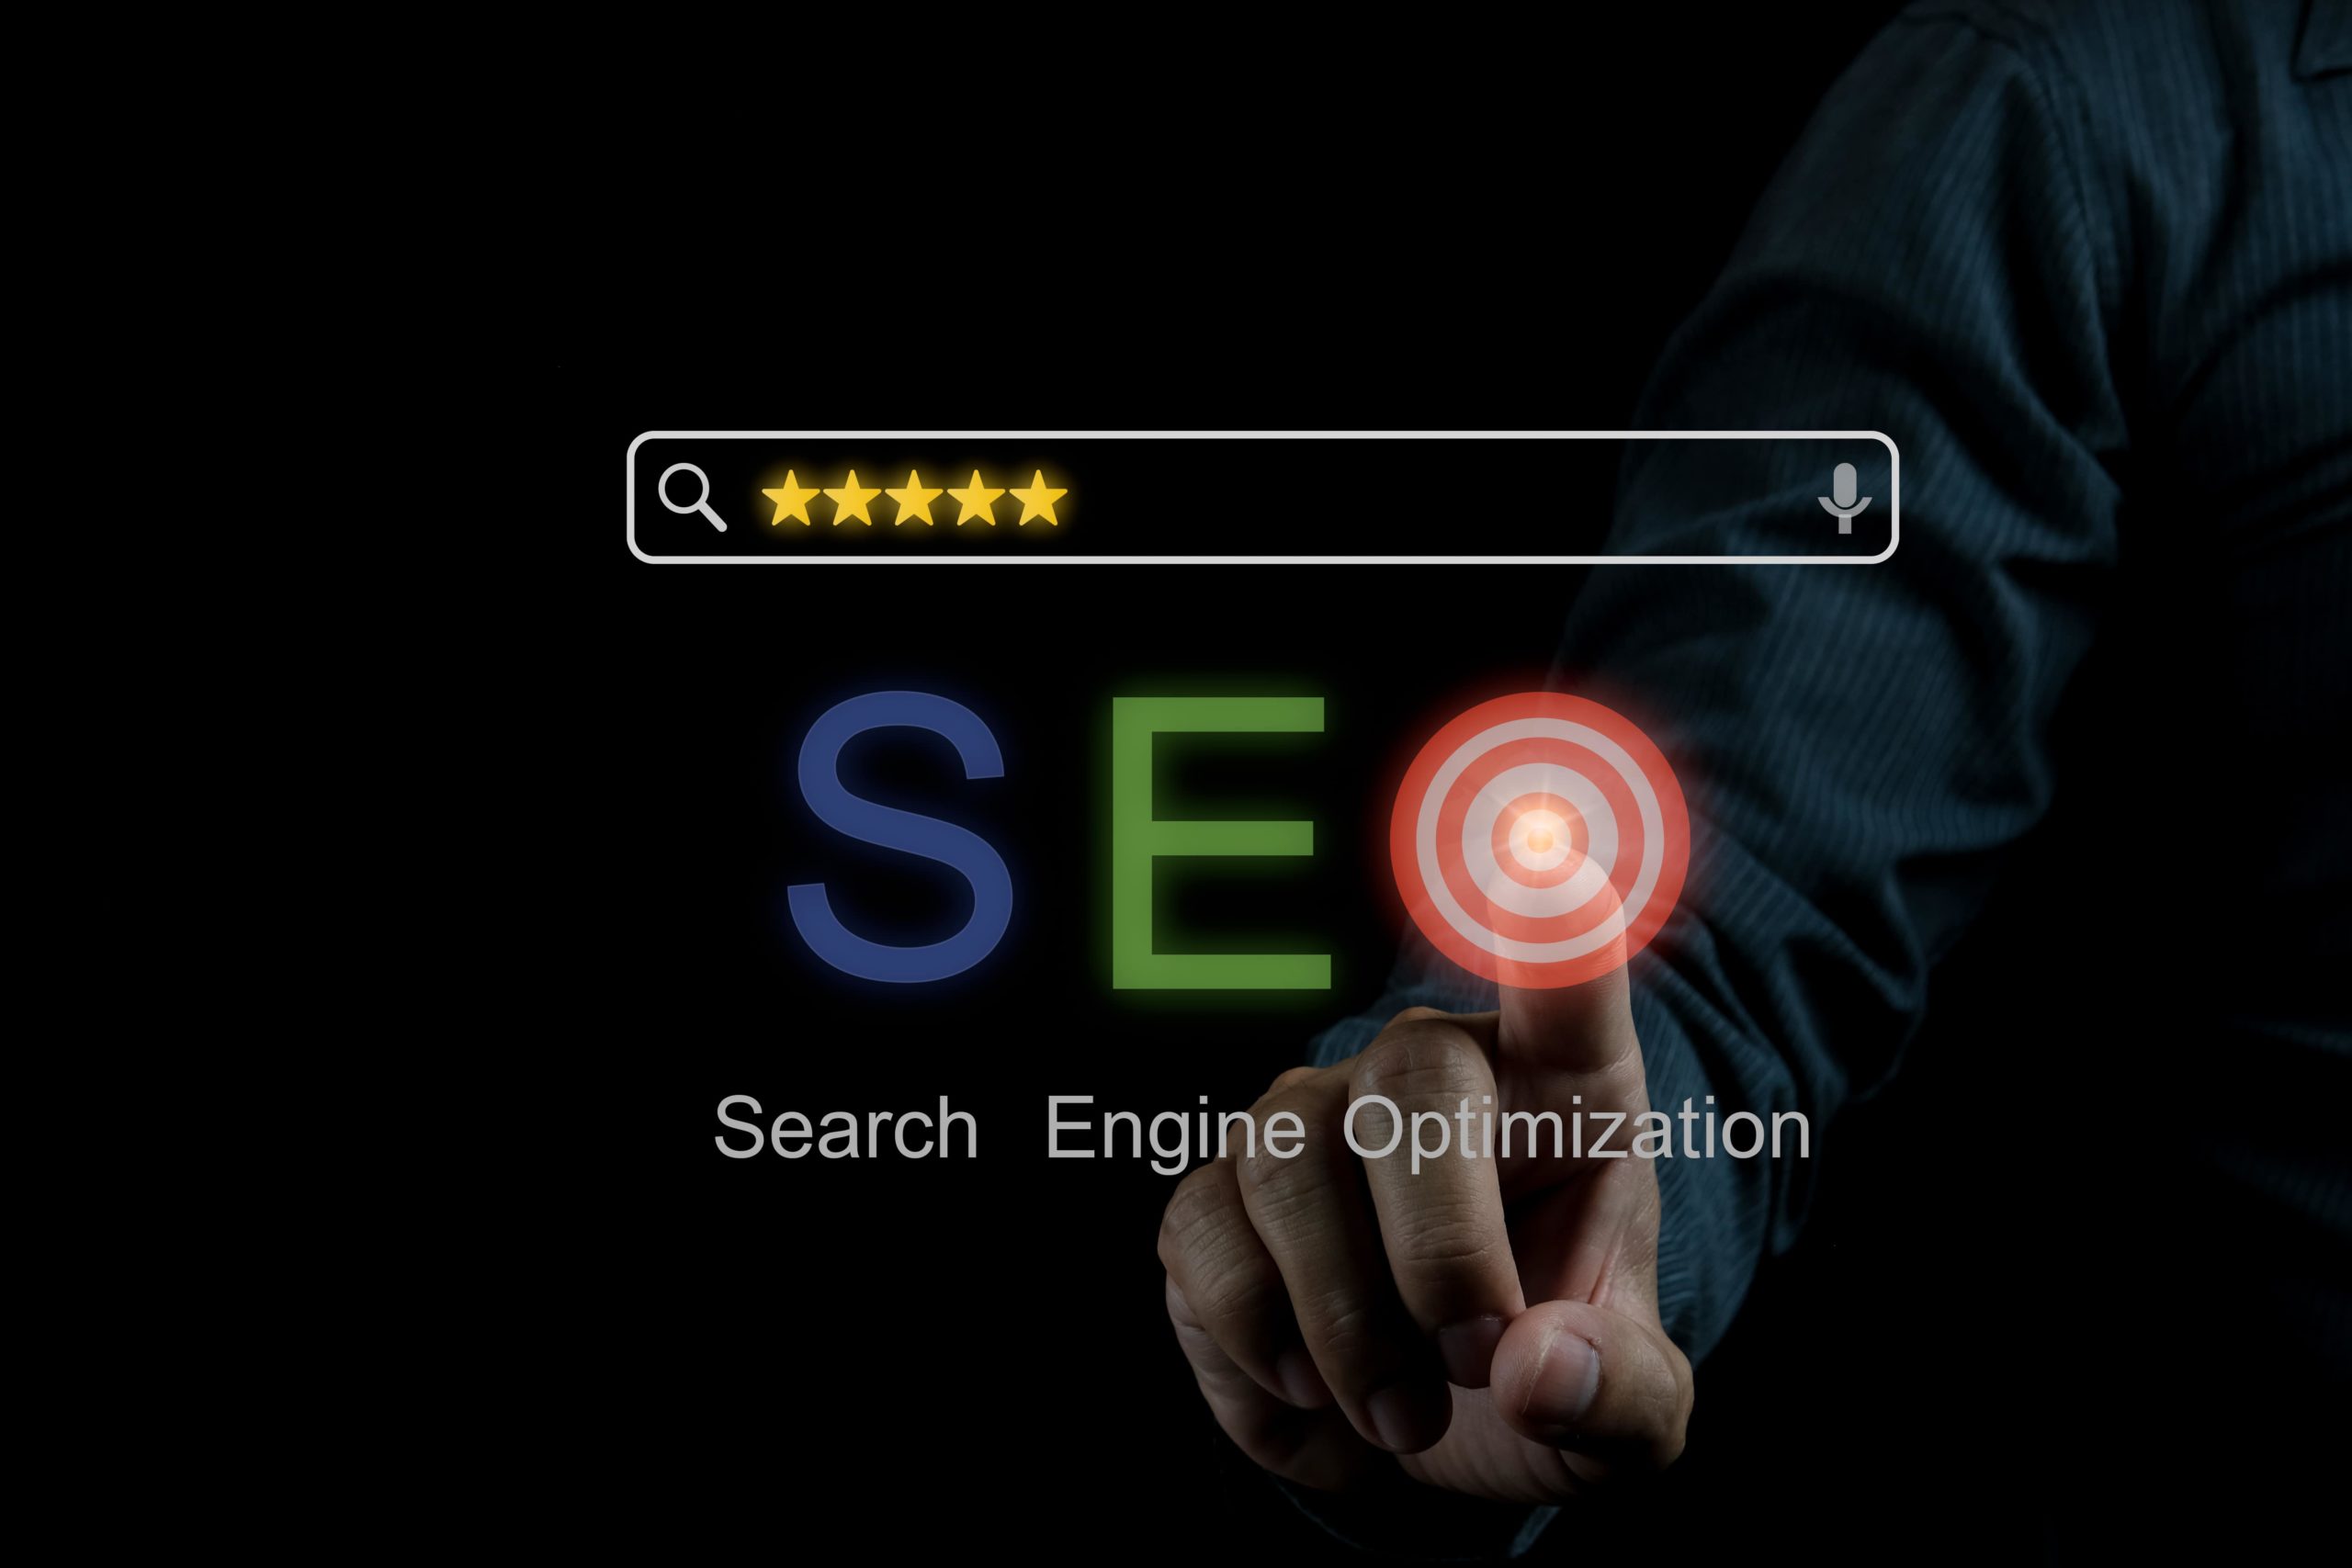 Achieve Higher Rankings Now Optimize Your Website for SEO!